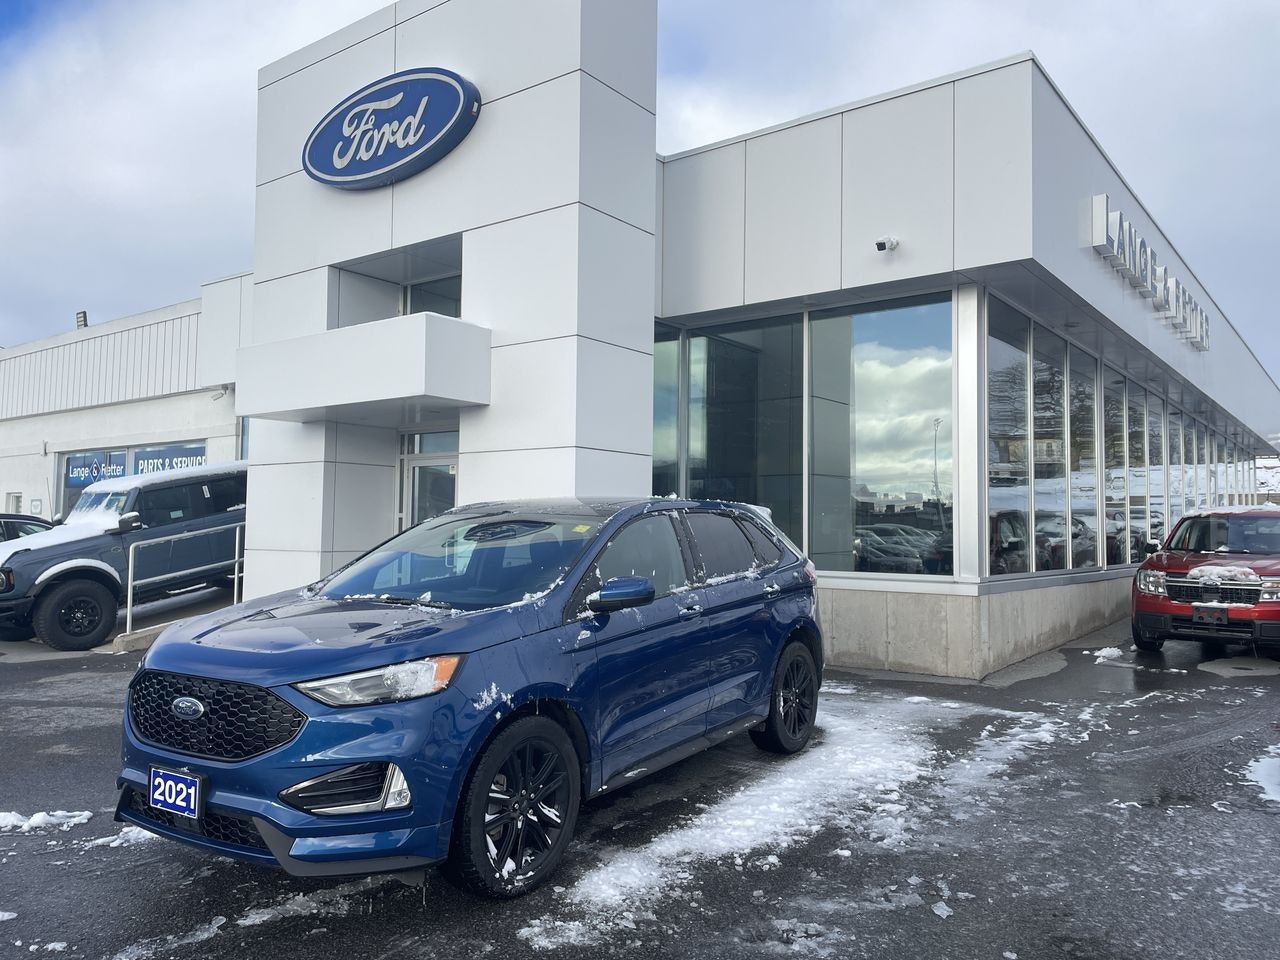 2021 Ford Edge - 21586A Full Image 1